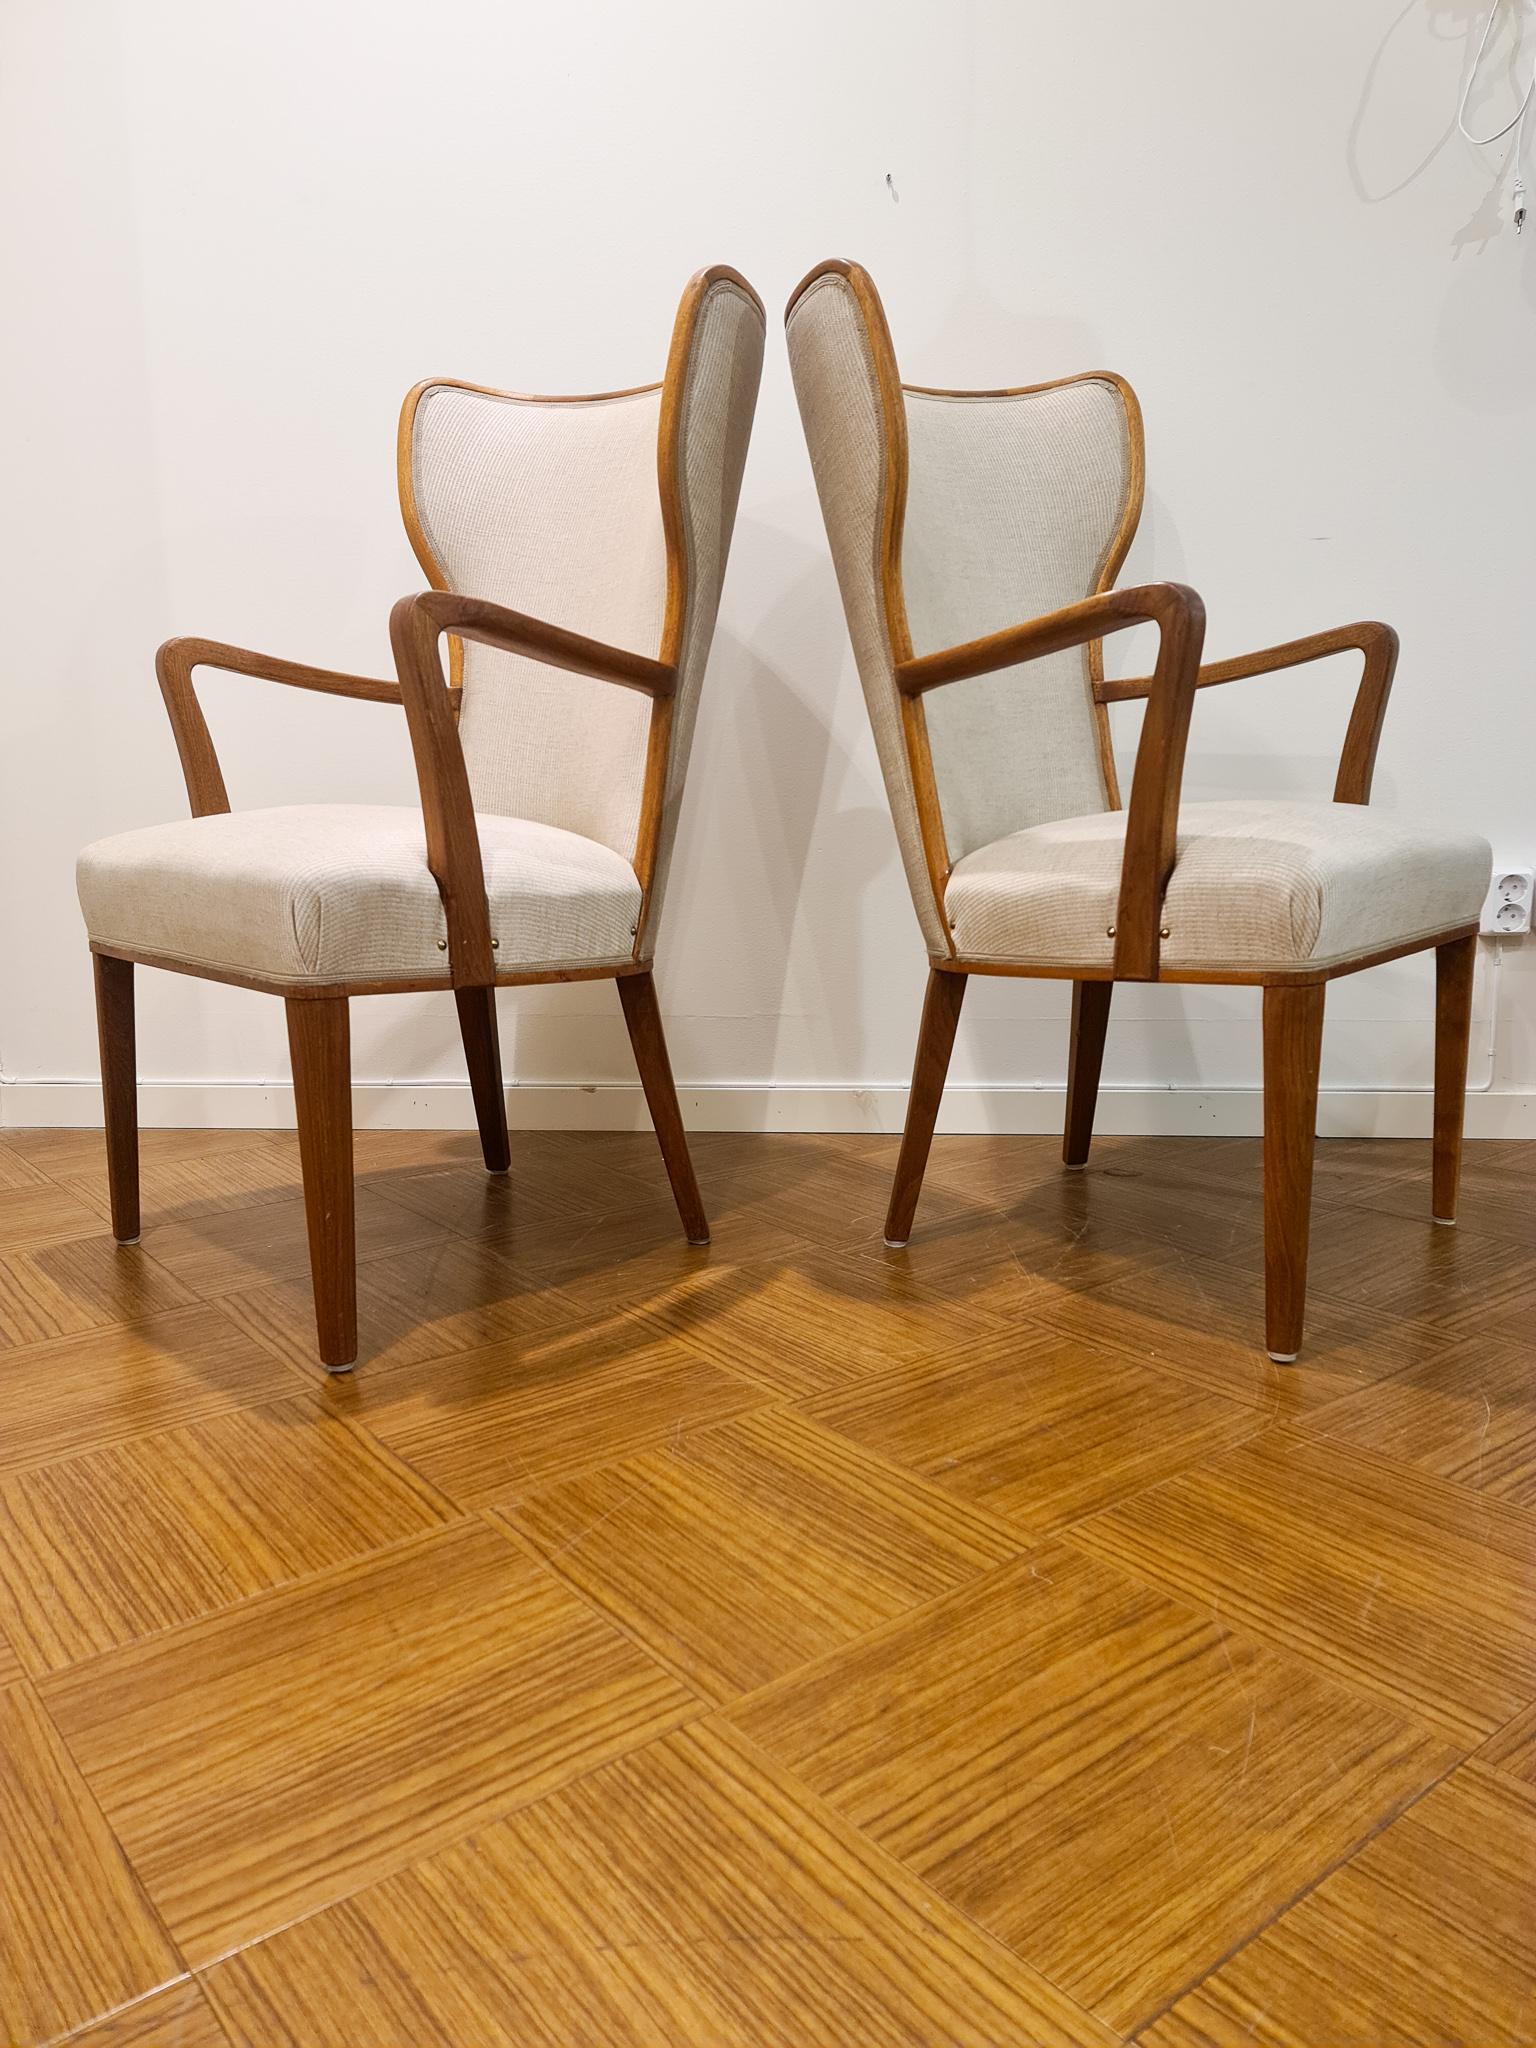 These well sculptured high ended chairs were produced in the early 1940s for AB Svenska Kontorsmöbler AB. They are made in oiled oak and have a new upholstery. The famous designer Axel Einar Hjort worked with the designs for the manufacturer and are